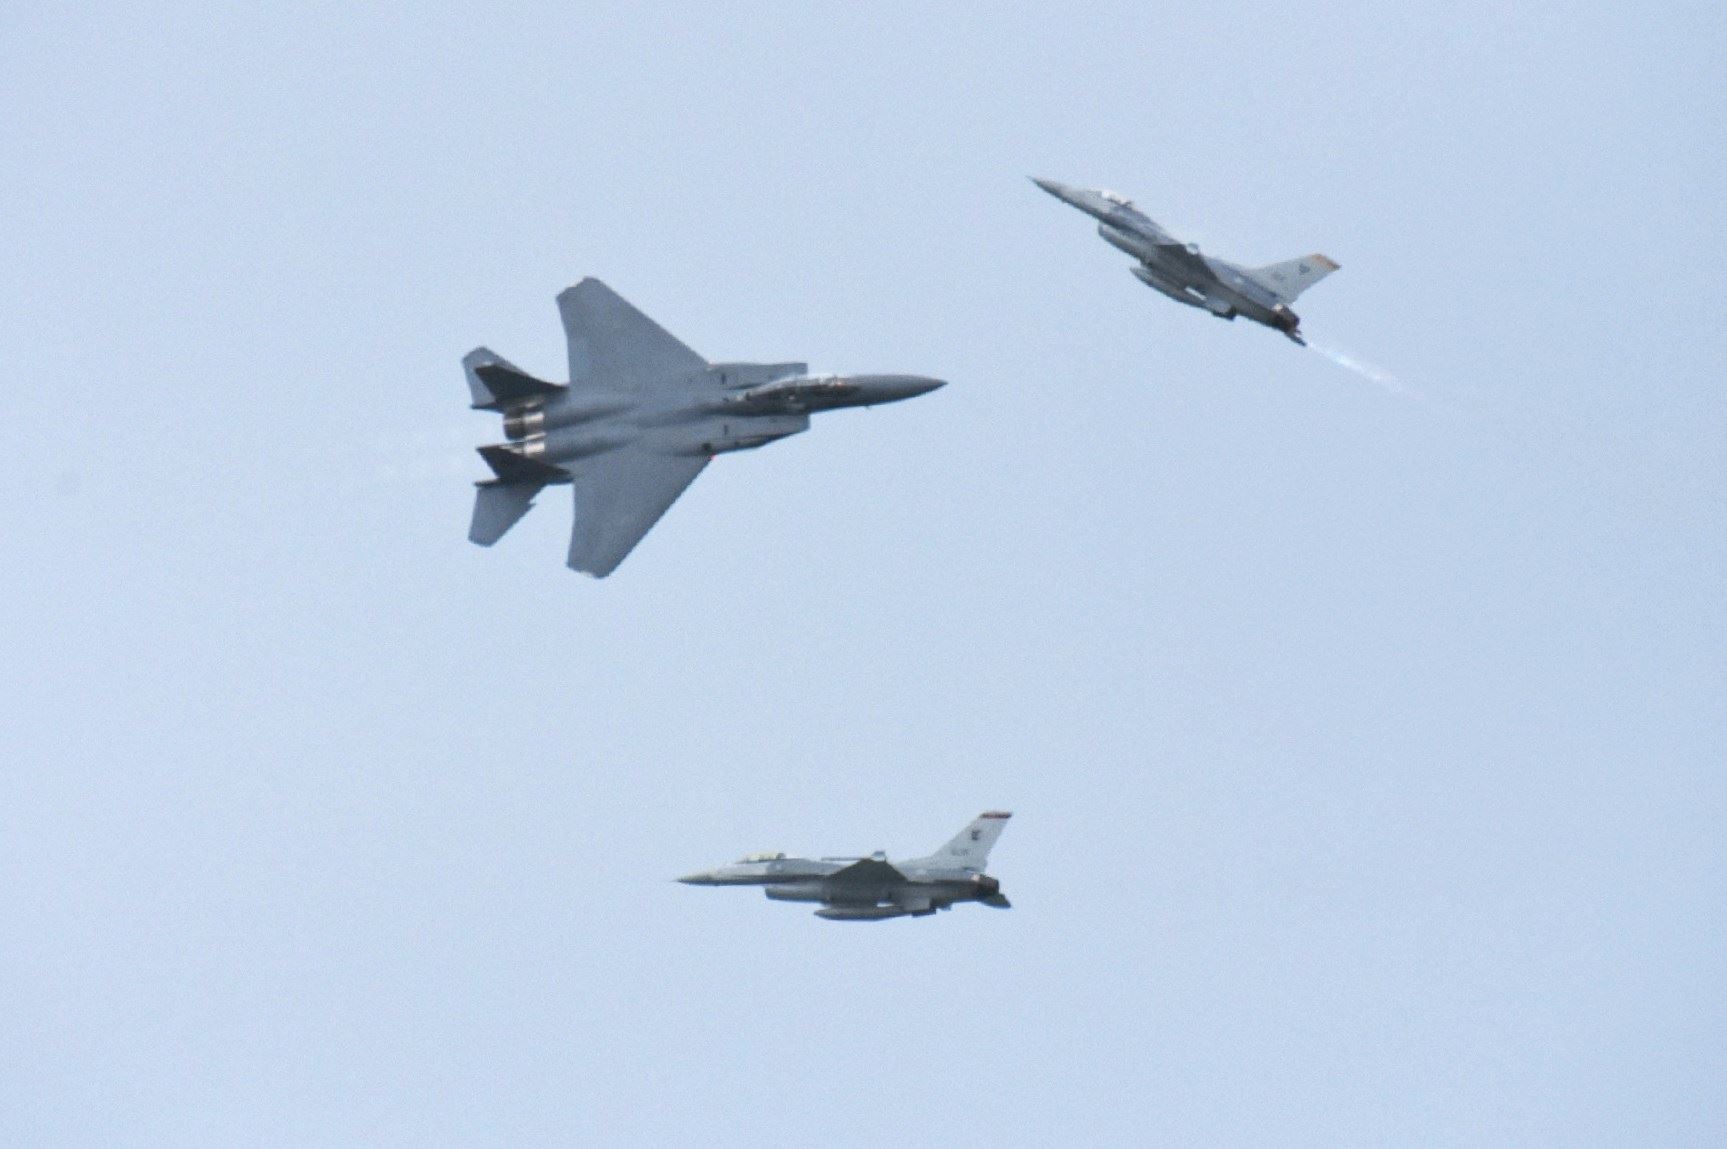 The F-15SG and F-16C fighter aircraft performing the ''3-Ship Low and Slow & High Speed Pass'' as part of the RSAF's aerial display at SA18.